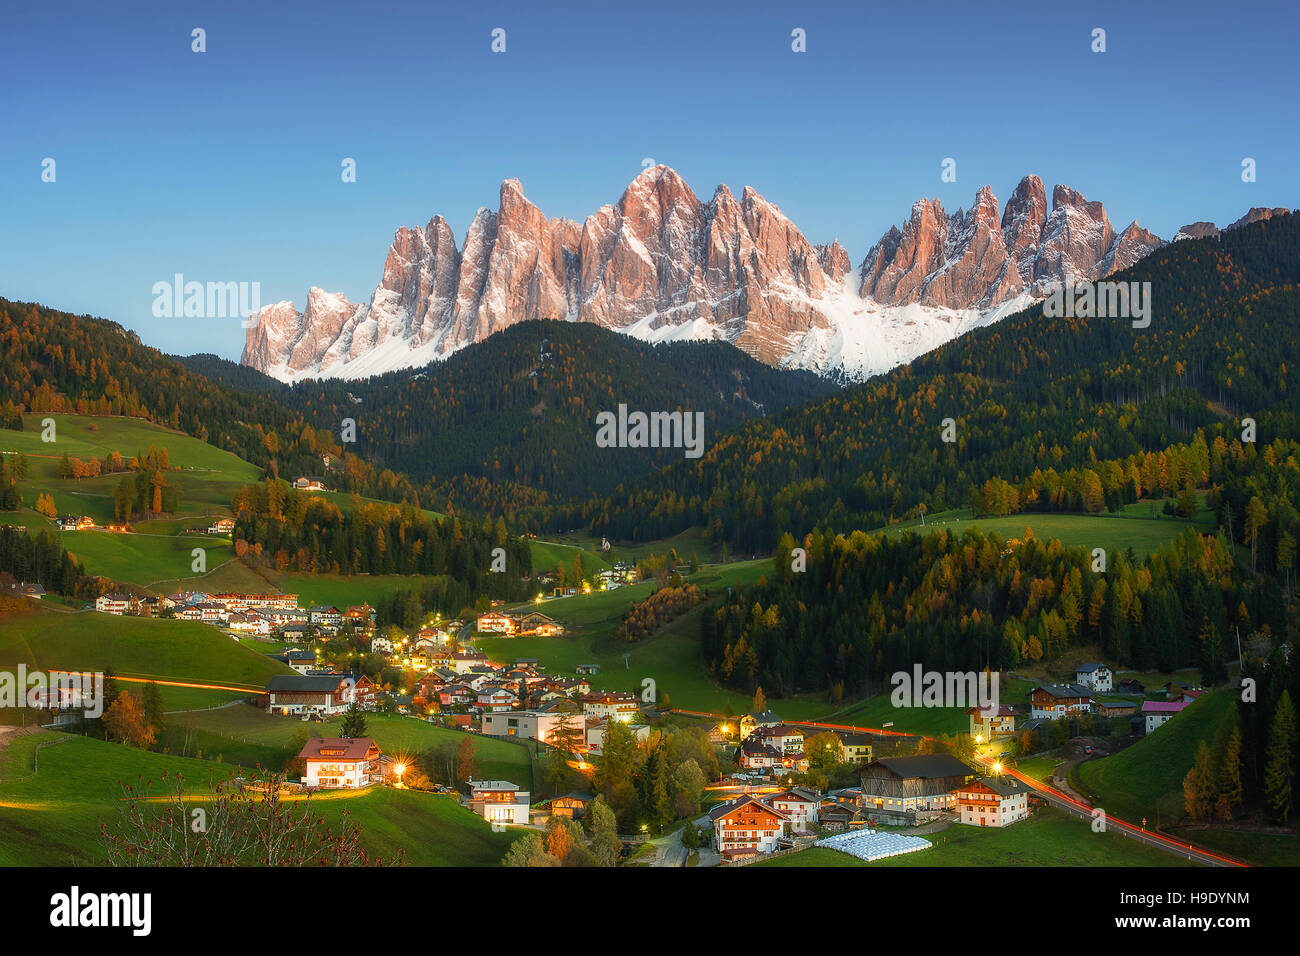 Night landscape with mountain peaks and vilage in valley Stock Photo